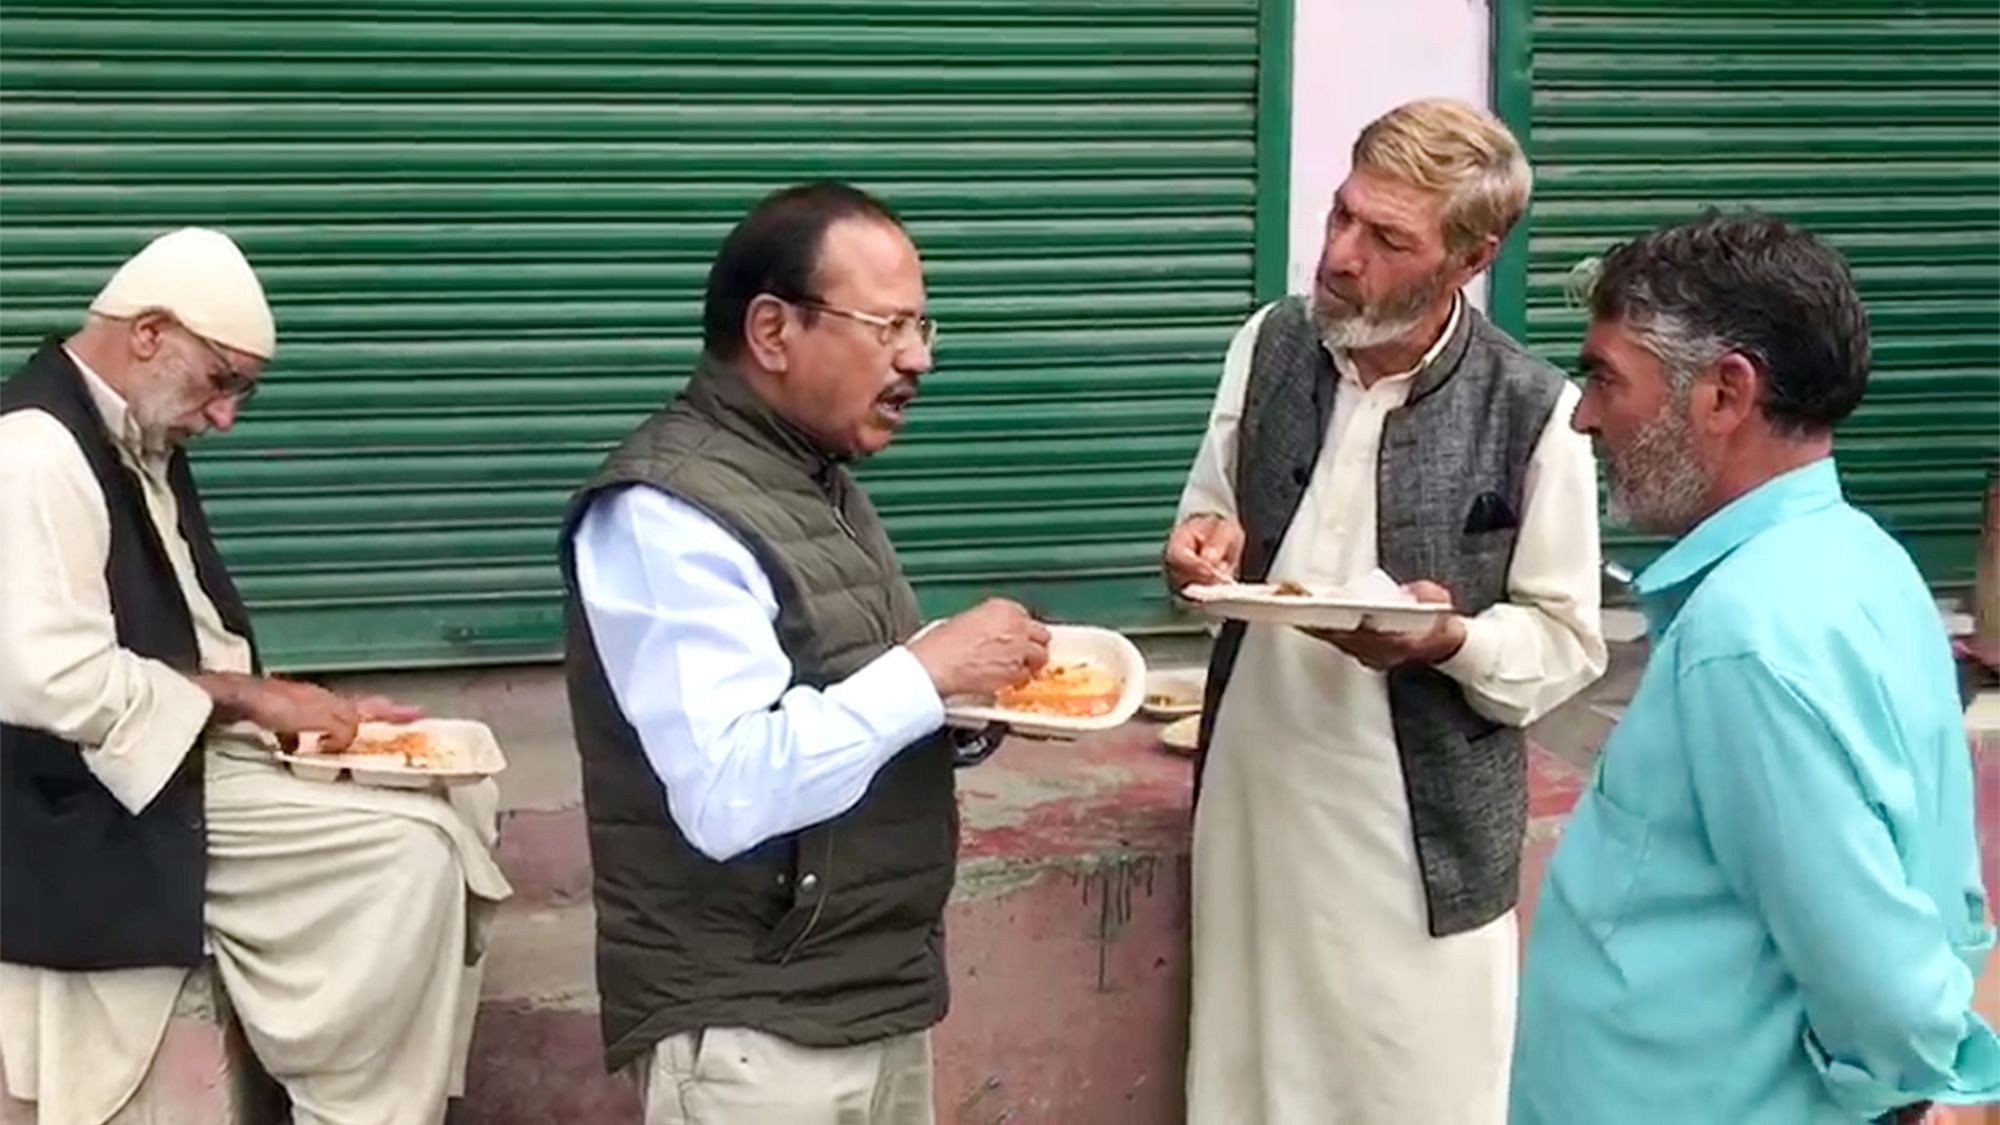 NSA Ajit Doval sharing lunch with locals amid curfew in Kashmir.